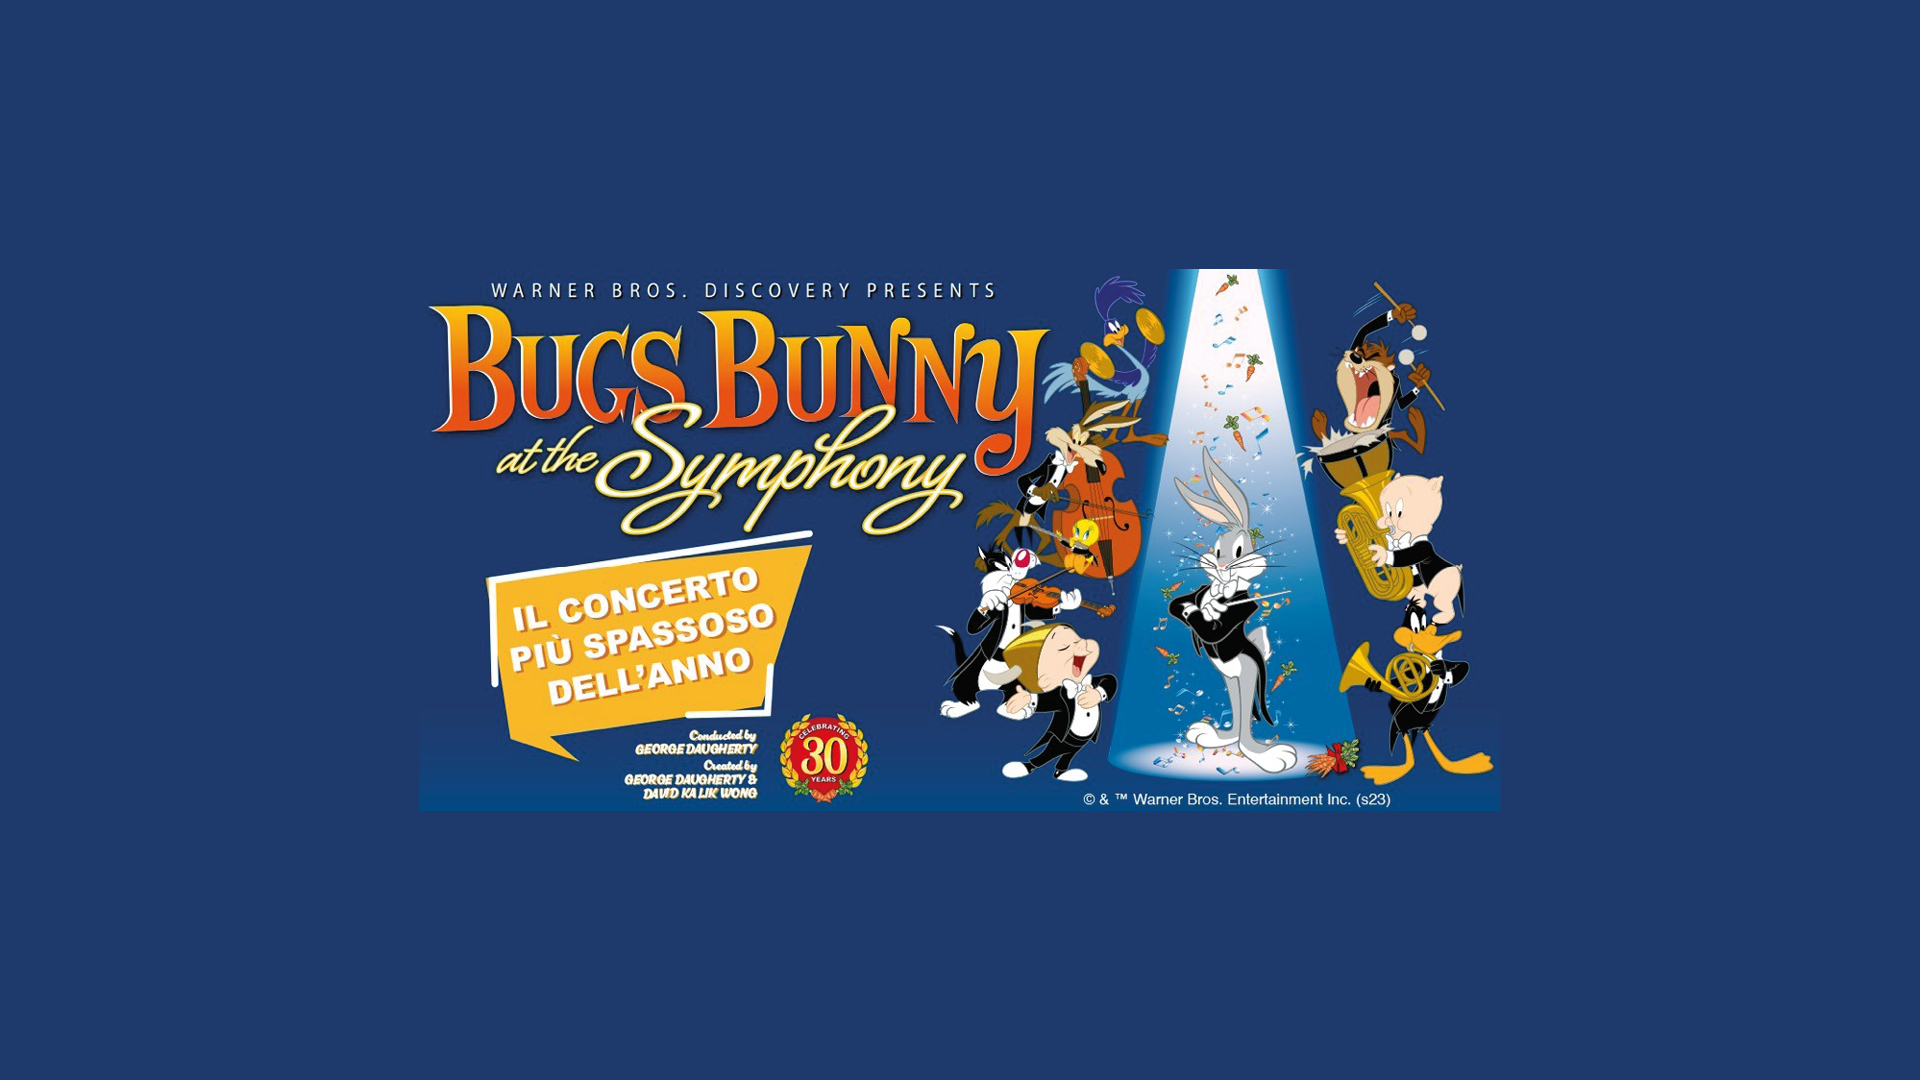 Warner Bros. Presents Bugs Bunny at the Symphony